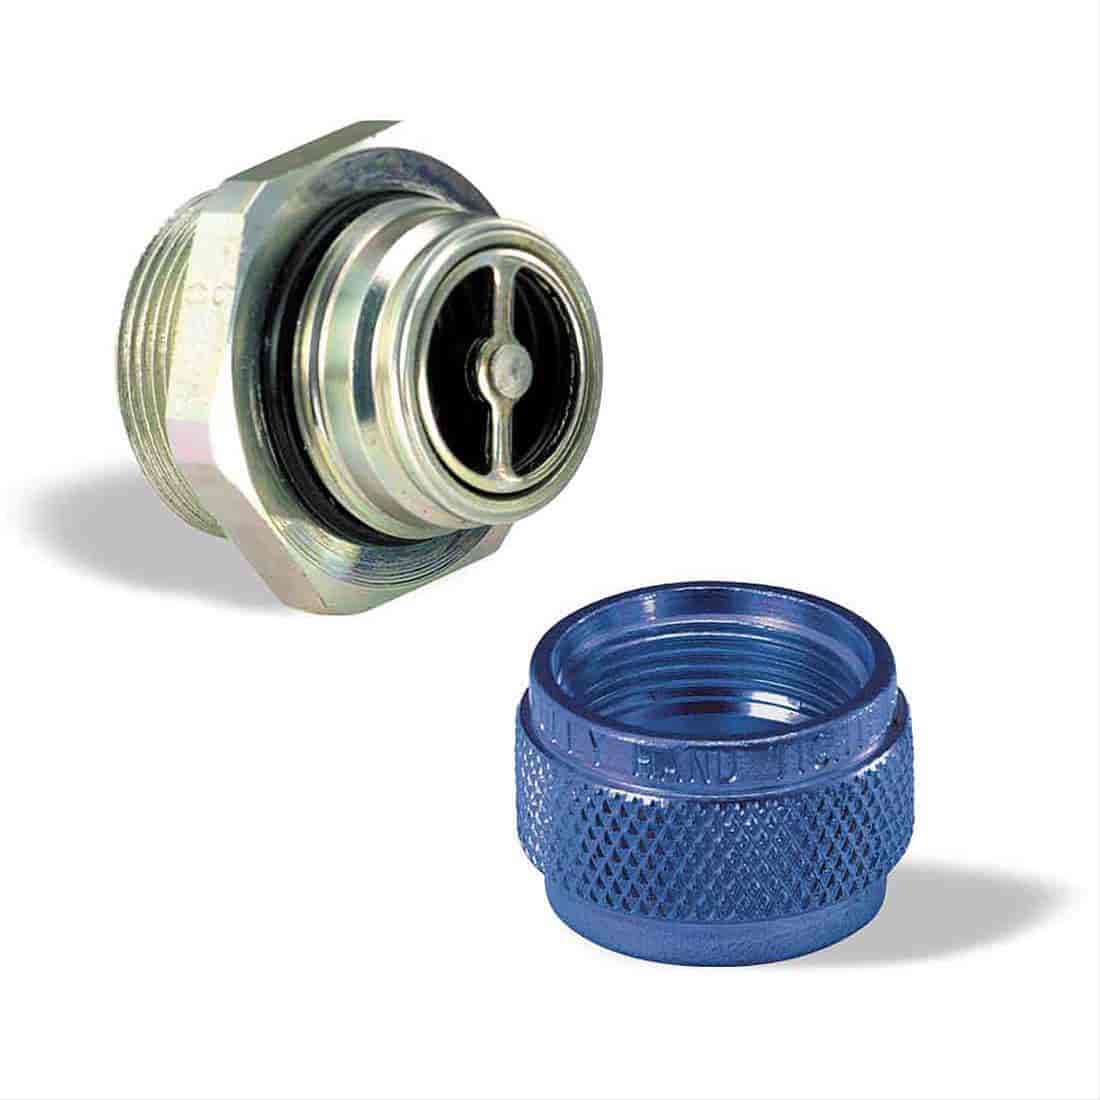 Male Half 3/4-16 UNF -2A Thread Size 1.54in.x.96in. 1-1/4in. Hex Size - Quick-Drain Oil Pan Coupling